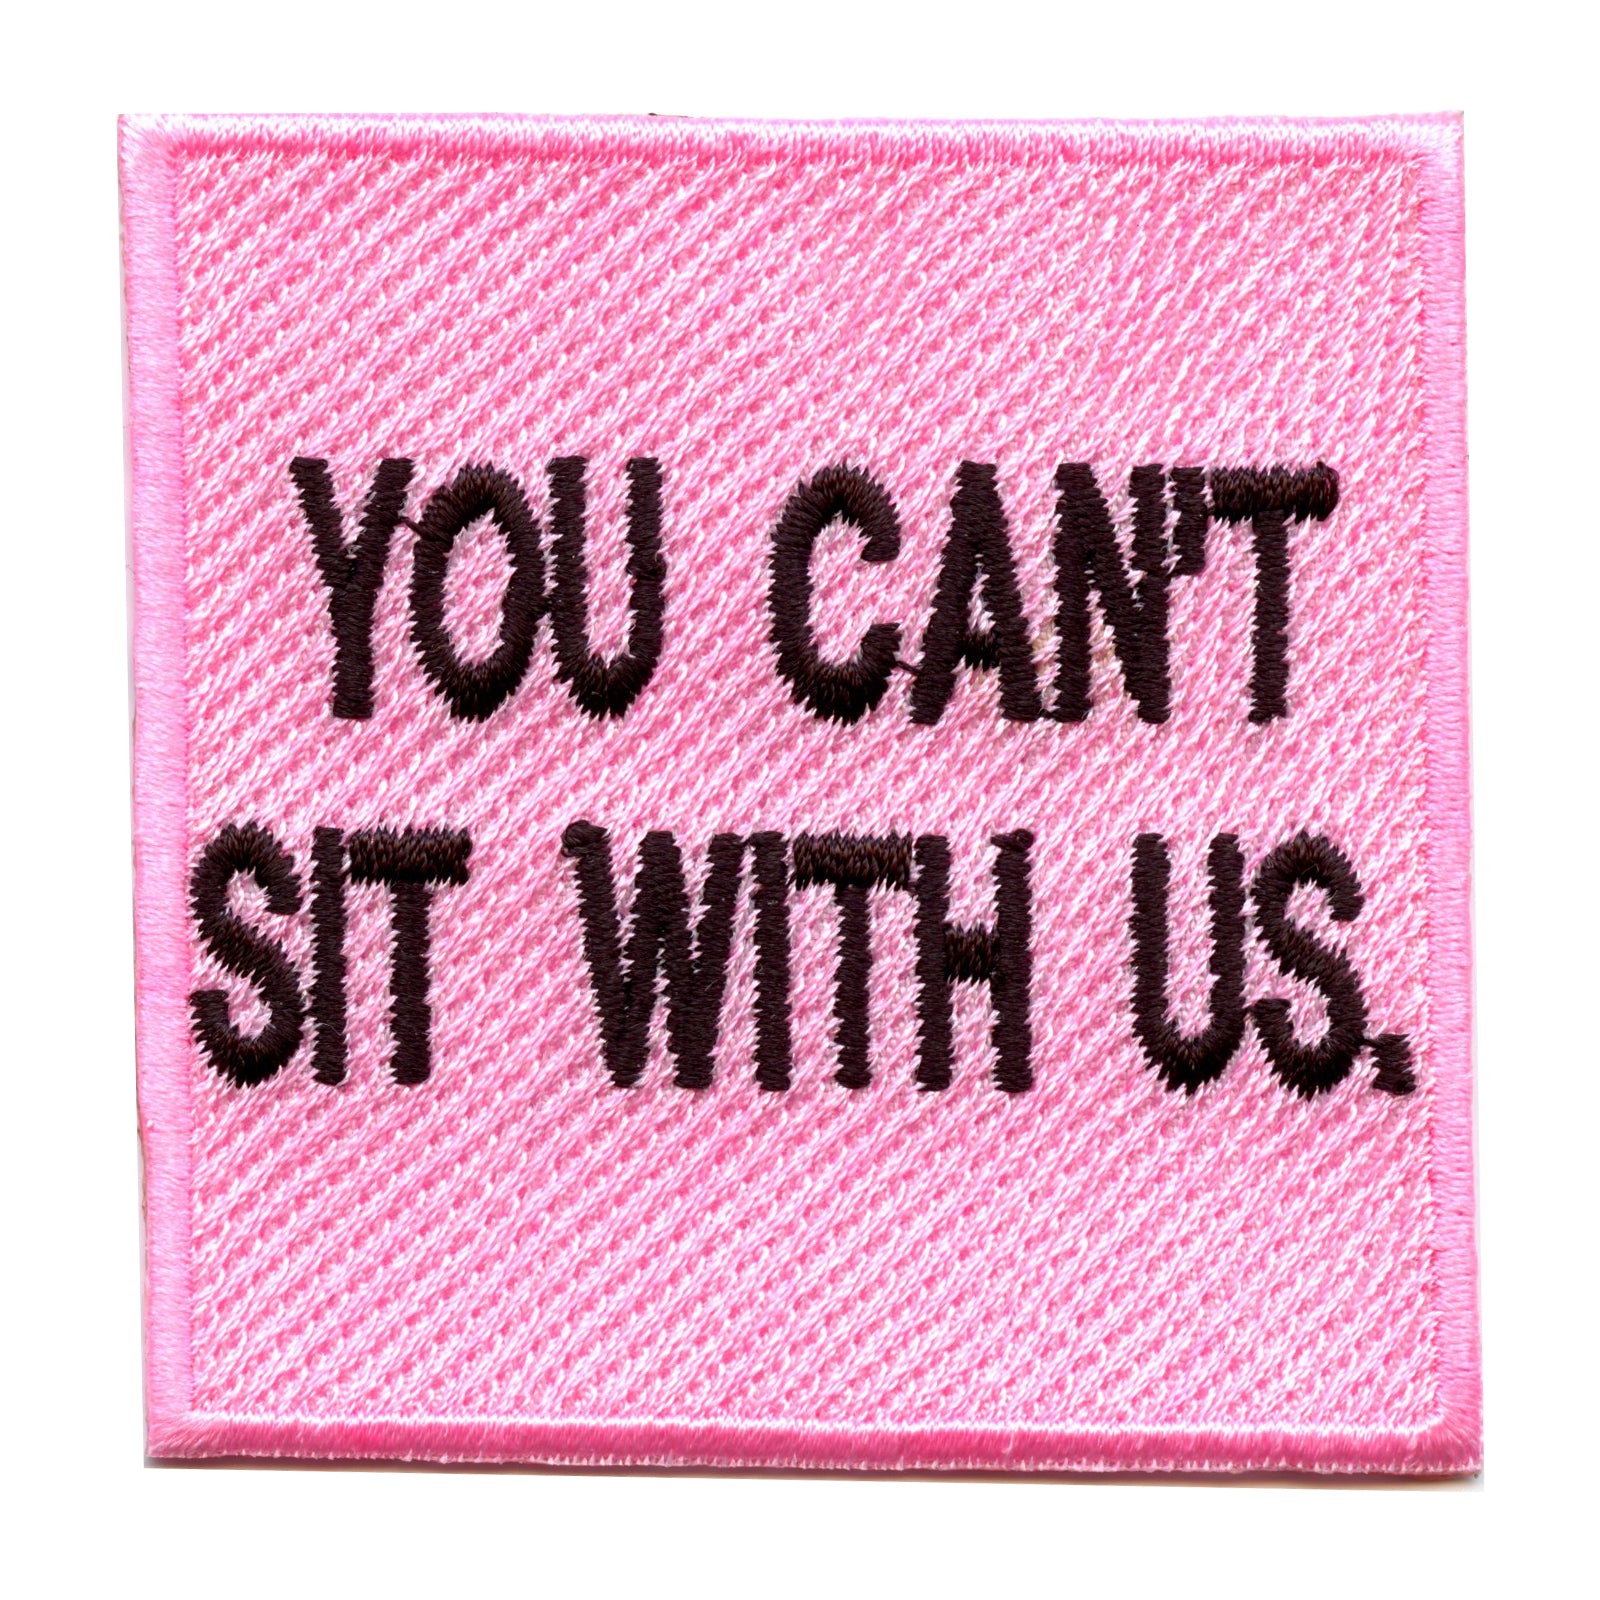 You Can't Sit With Us Box Embroidered Iron On Patch